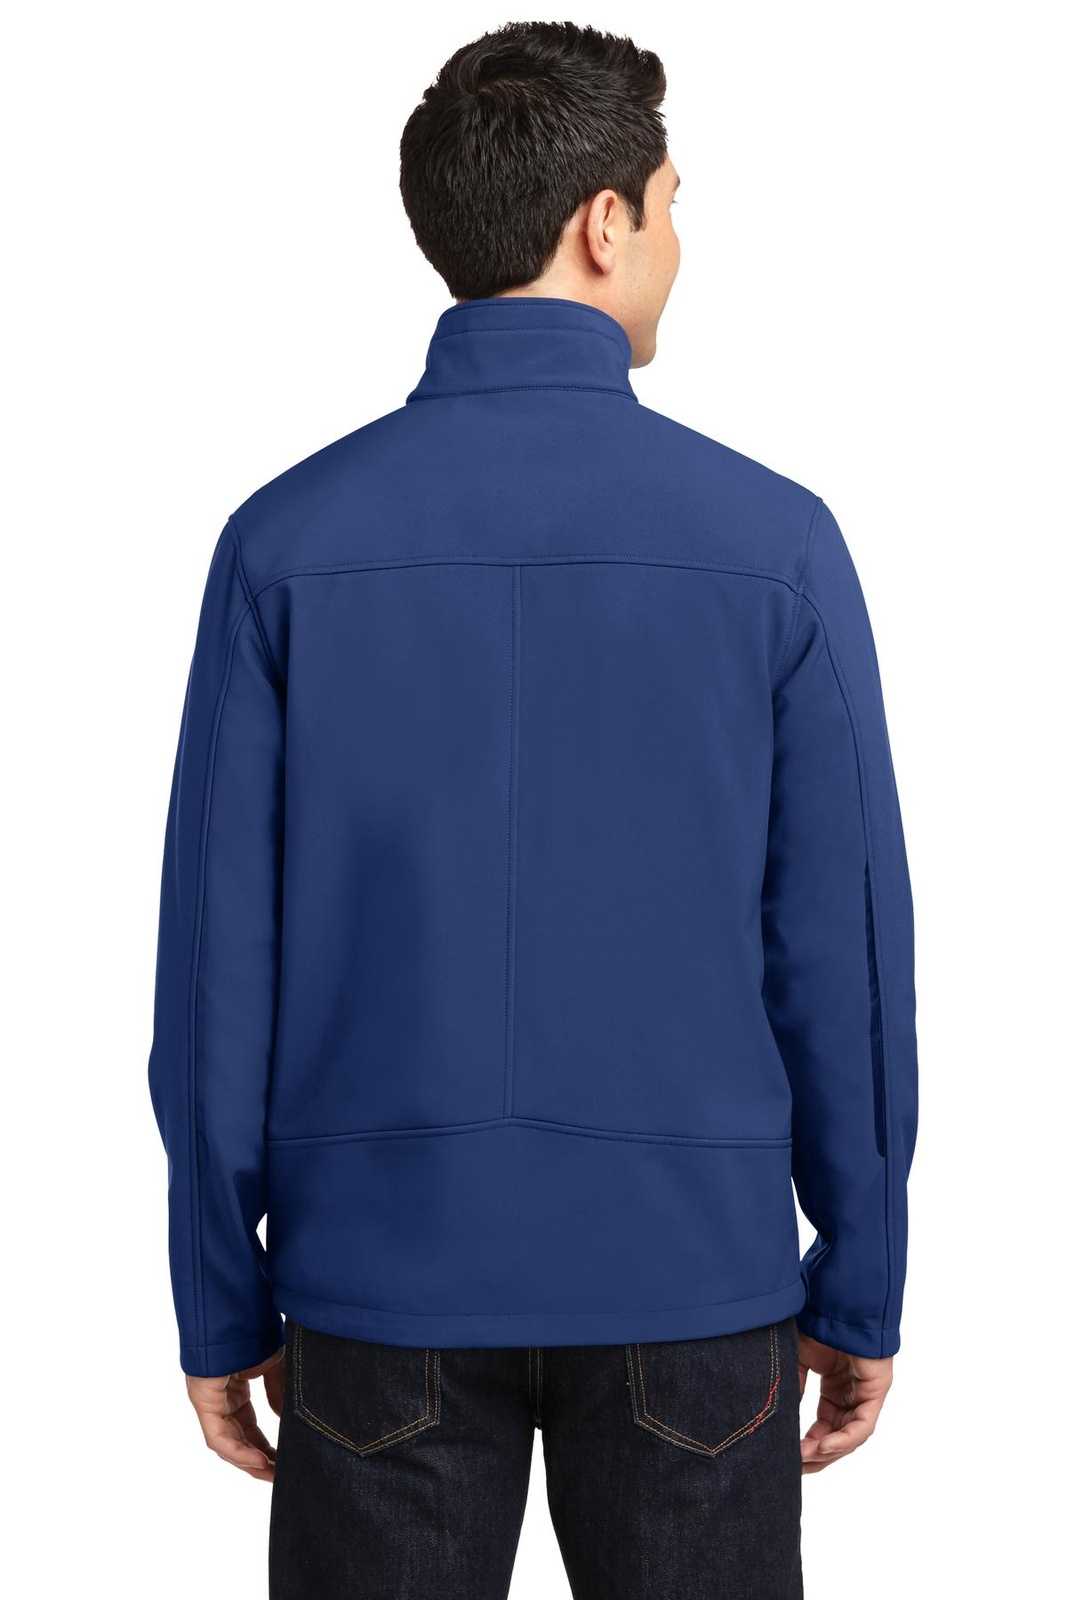 Port Authority J324 Welded Soft Shell Jacket - Estate Blue - HIT a Double - 1